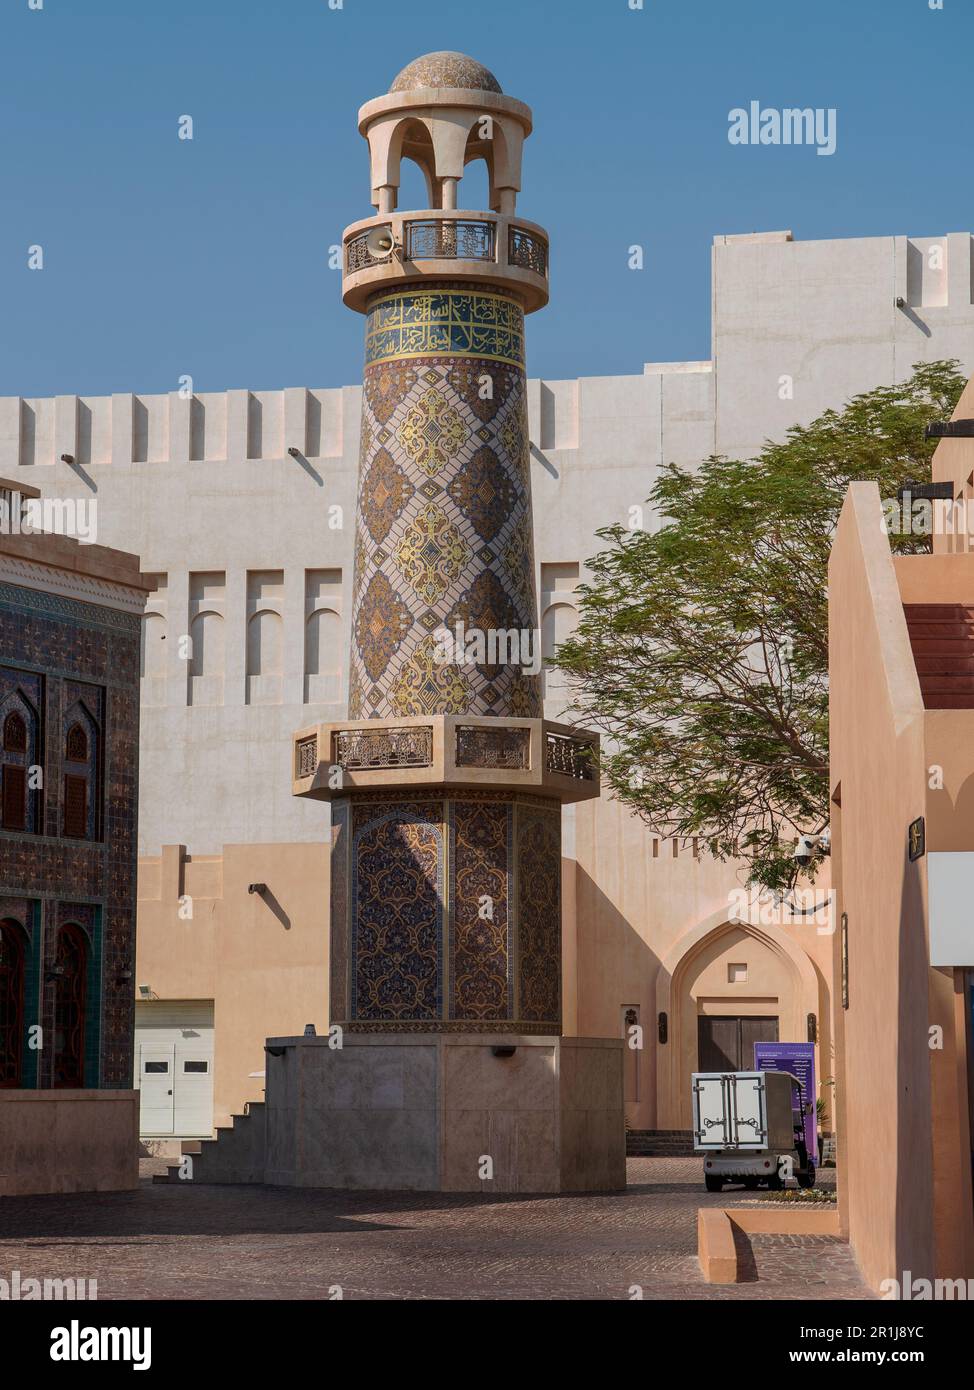 The beautiful Minaret of the ornamented Mosque In Katara Village is adorned with handcrafted glass mosaics Persian patterns. This marvelous house of w Stock Photo